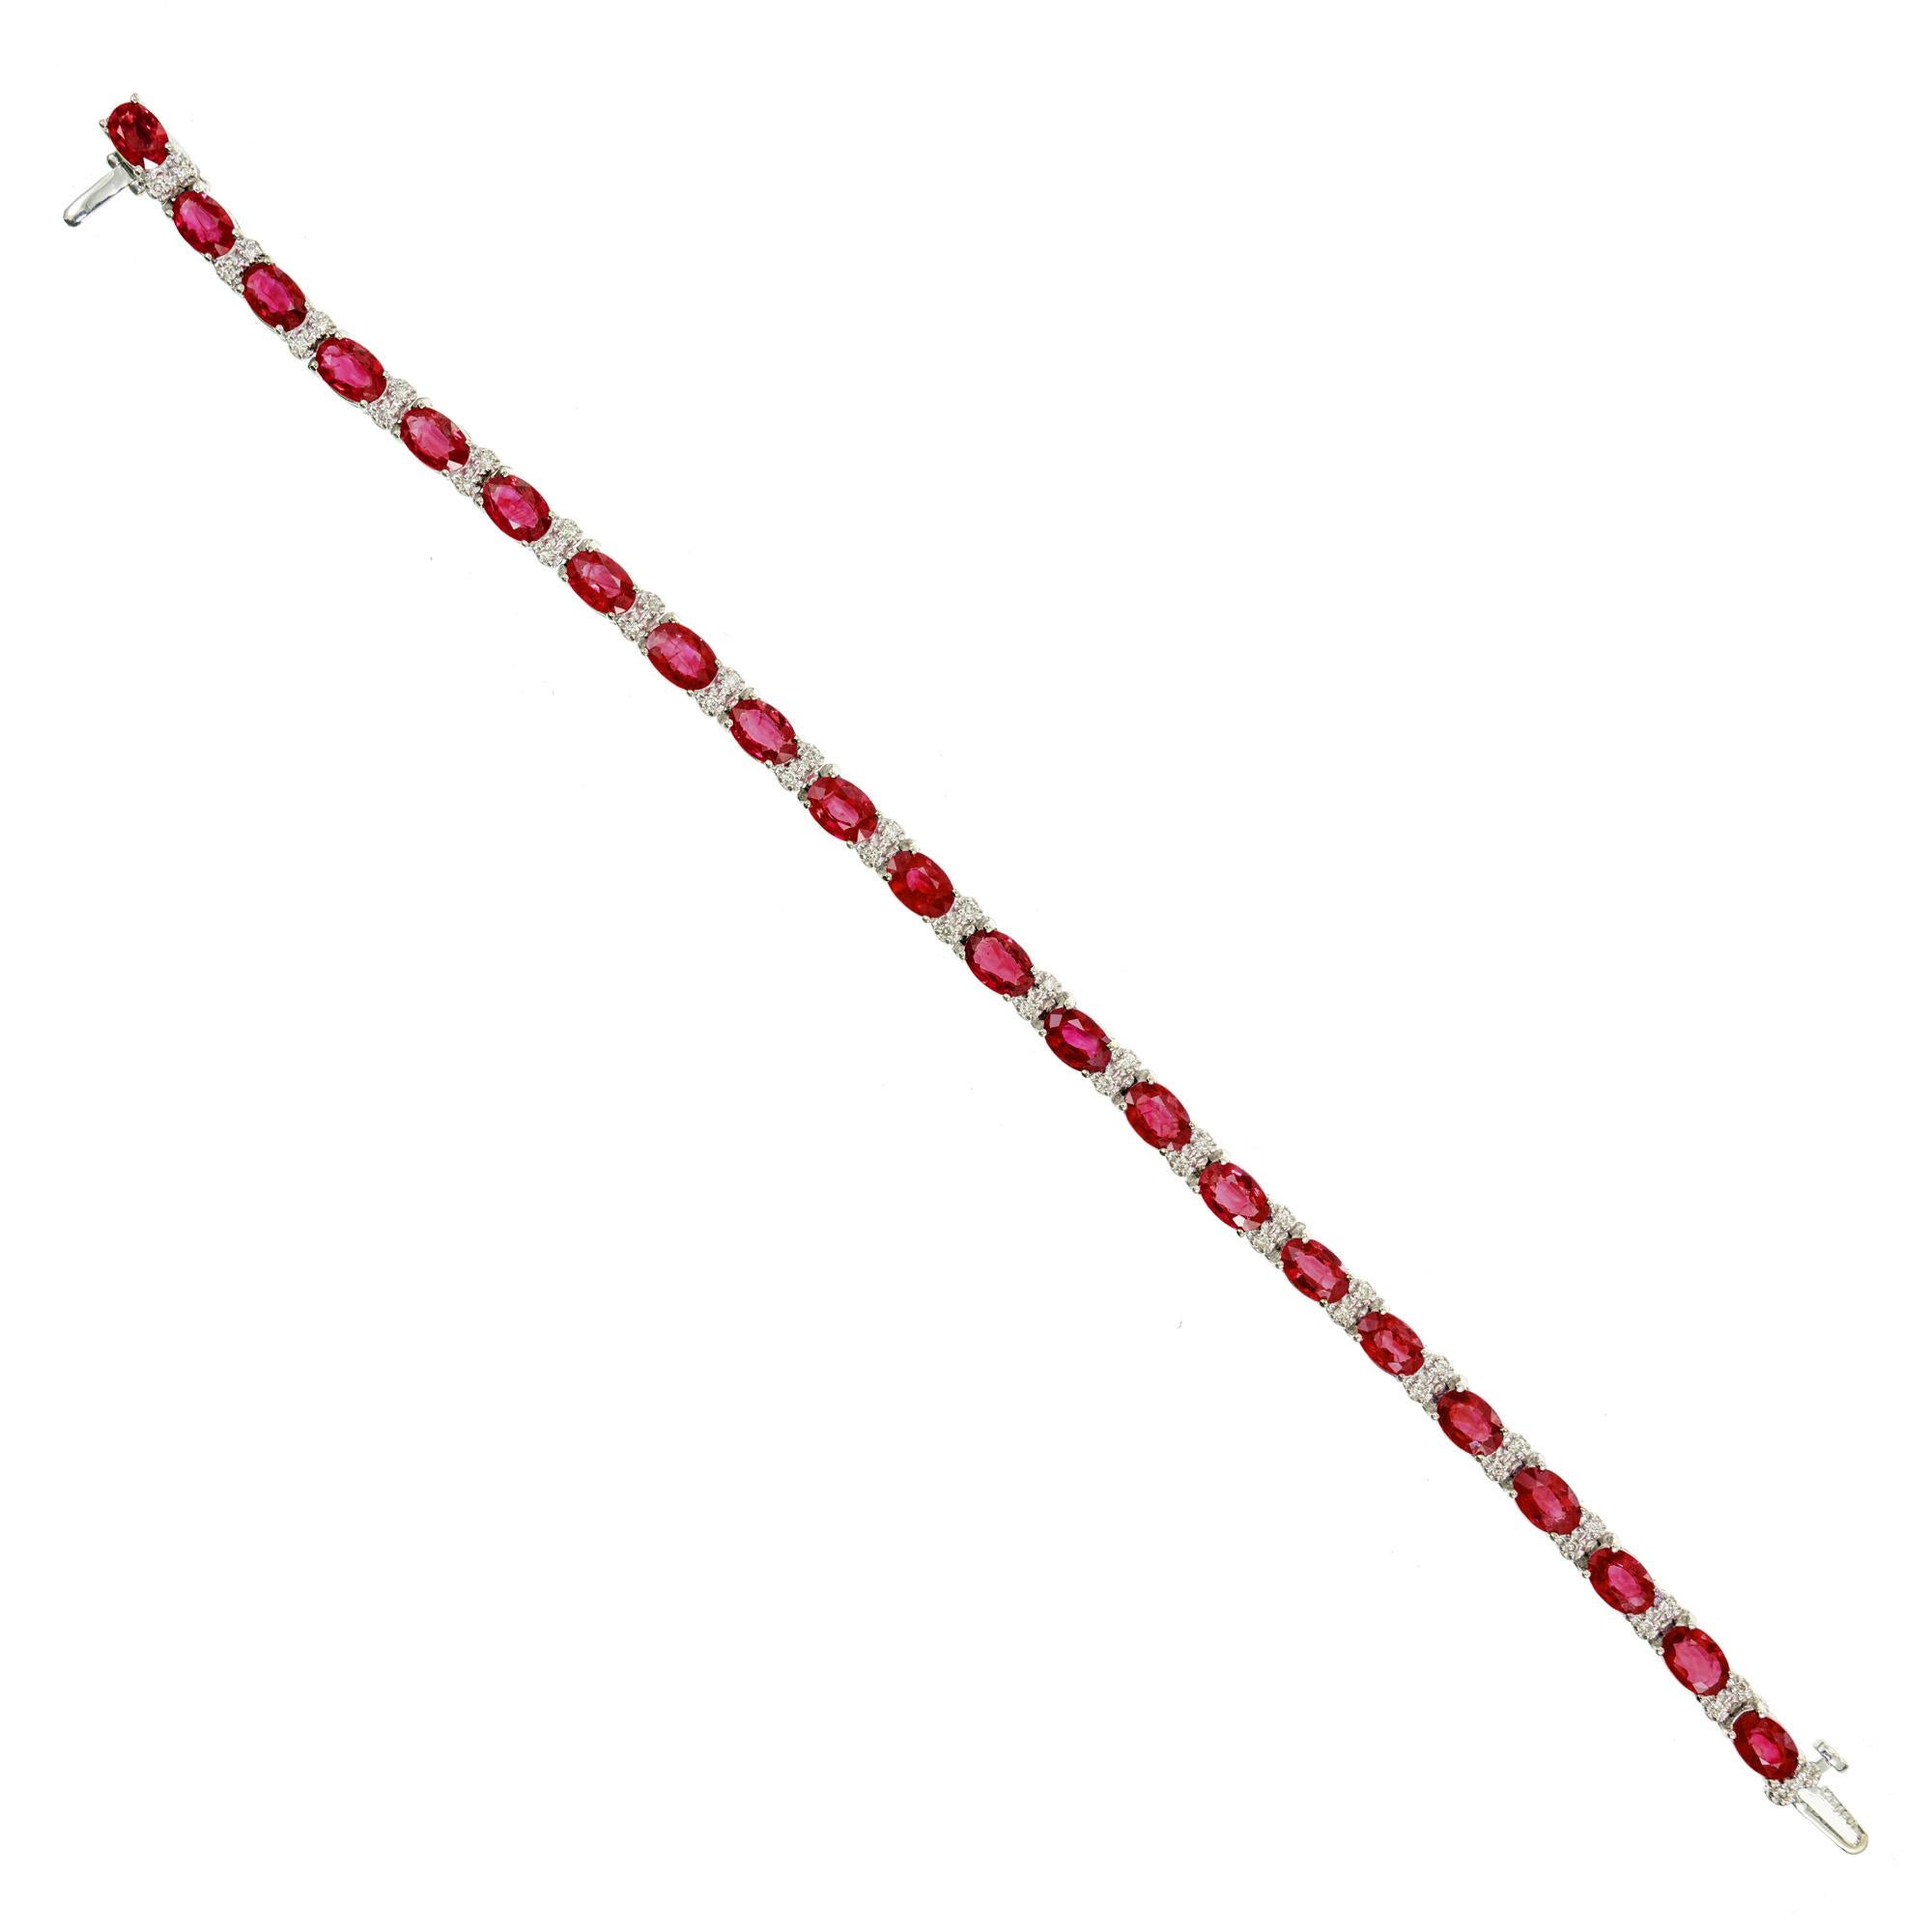 Beautiful Le Vian GIA certified ruby and diamond bracelet. 22 spectacular oval brilliant cut purple/red rubies totaling 11:00cts, spaced with 44 round brilliant cut, near colorless diamonds set in 14k white gold. 7.25 inches in length. Built in box